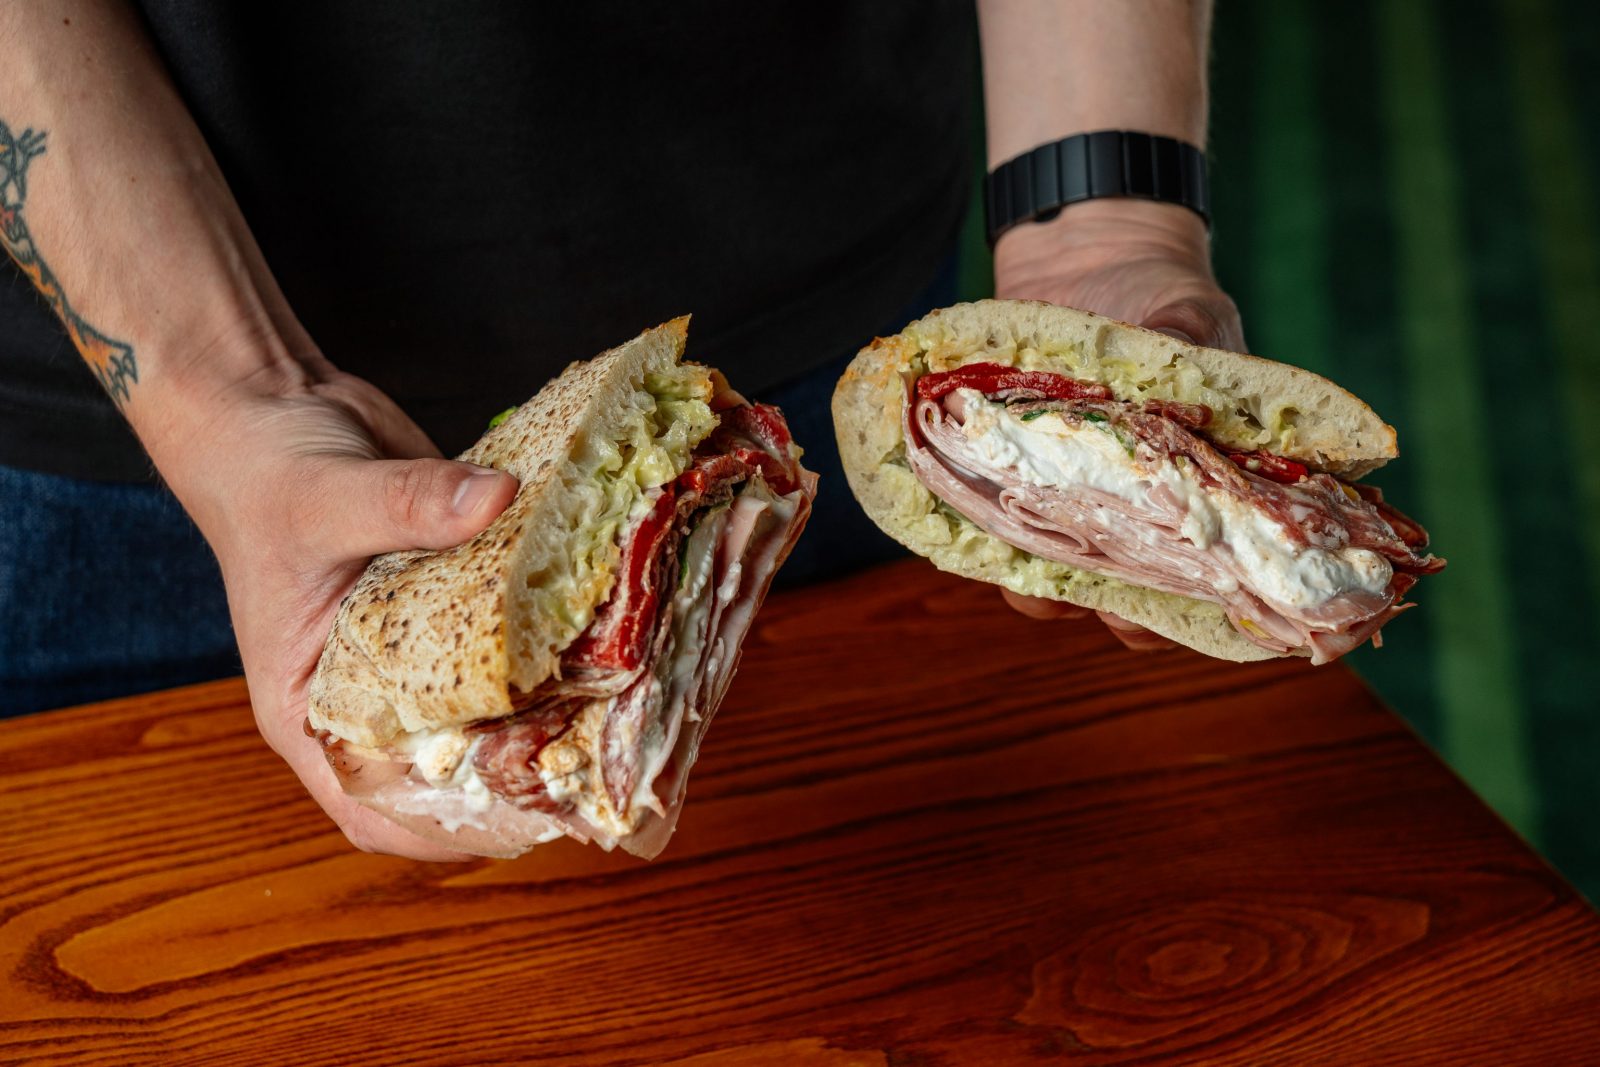 two pizza sandwiches held in two hands.